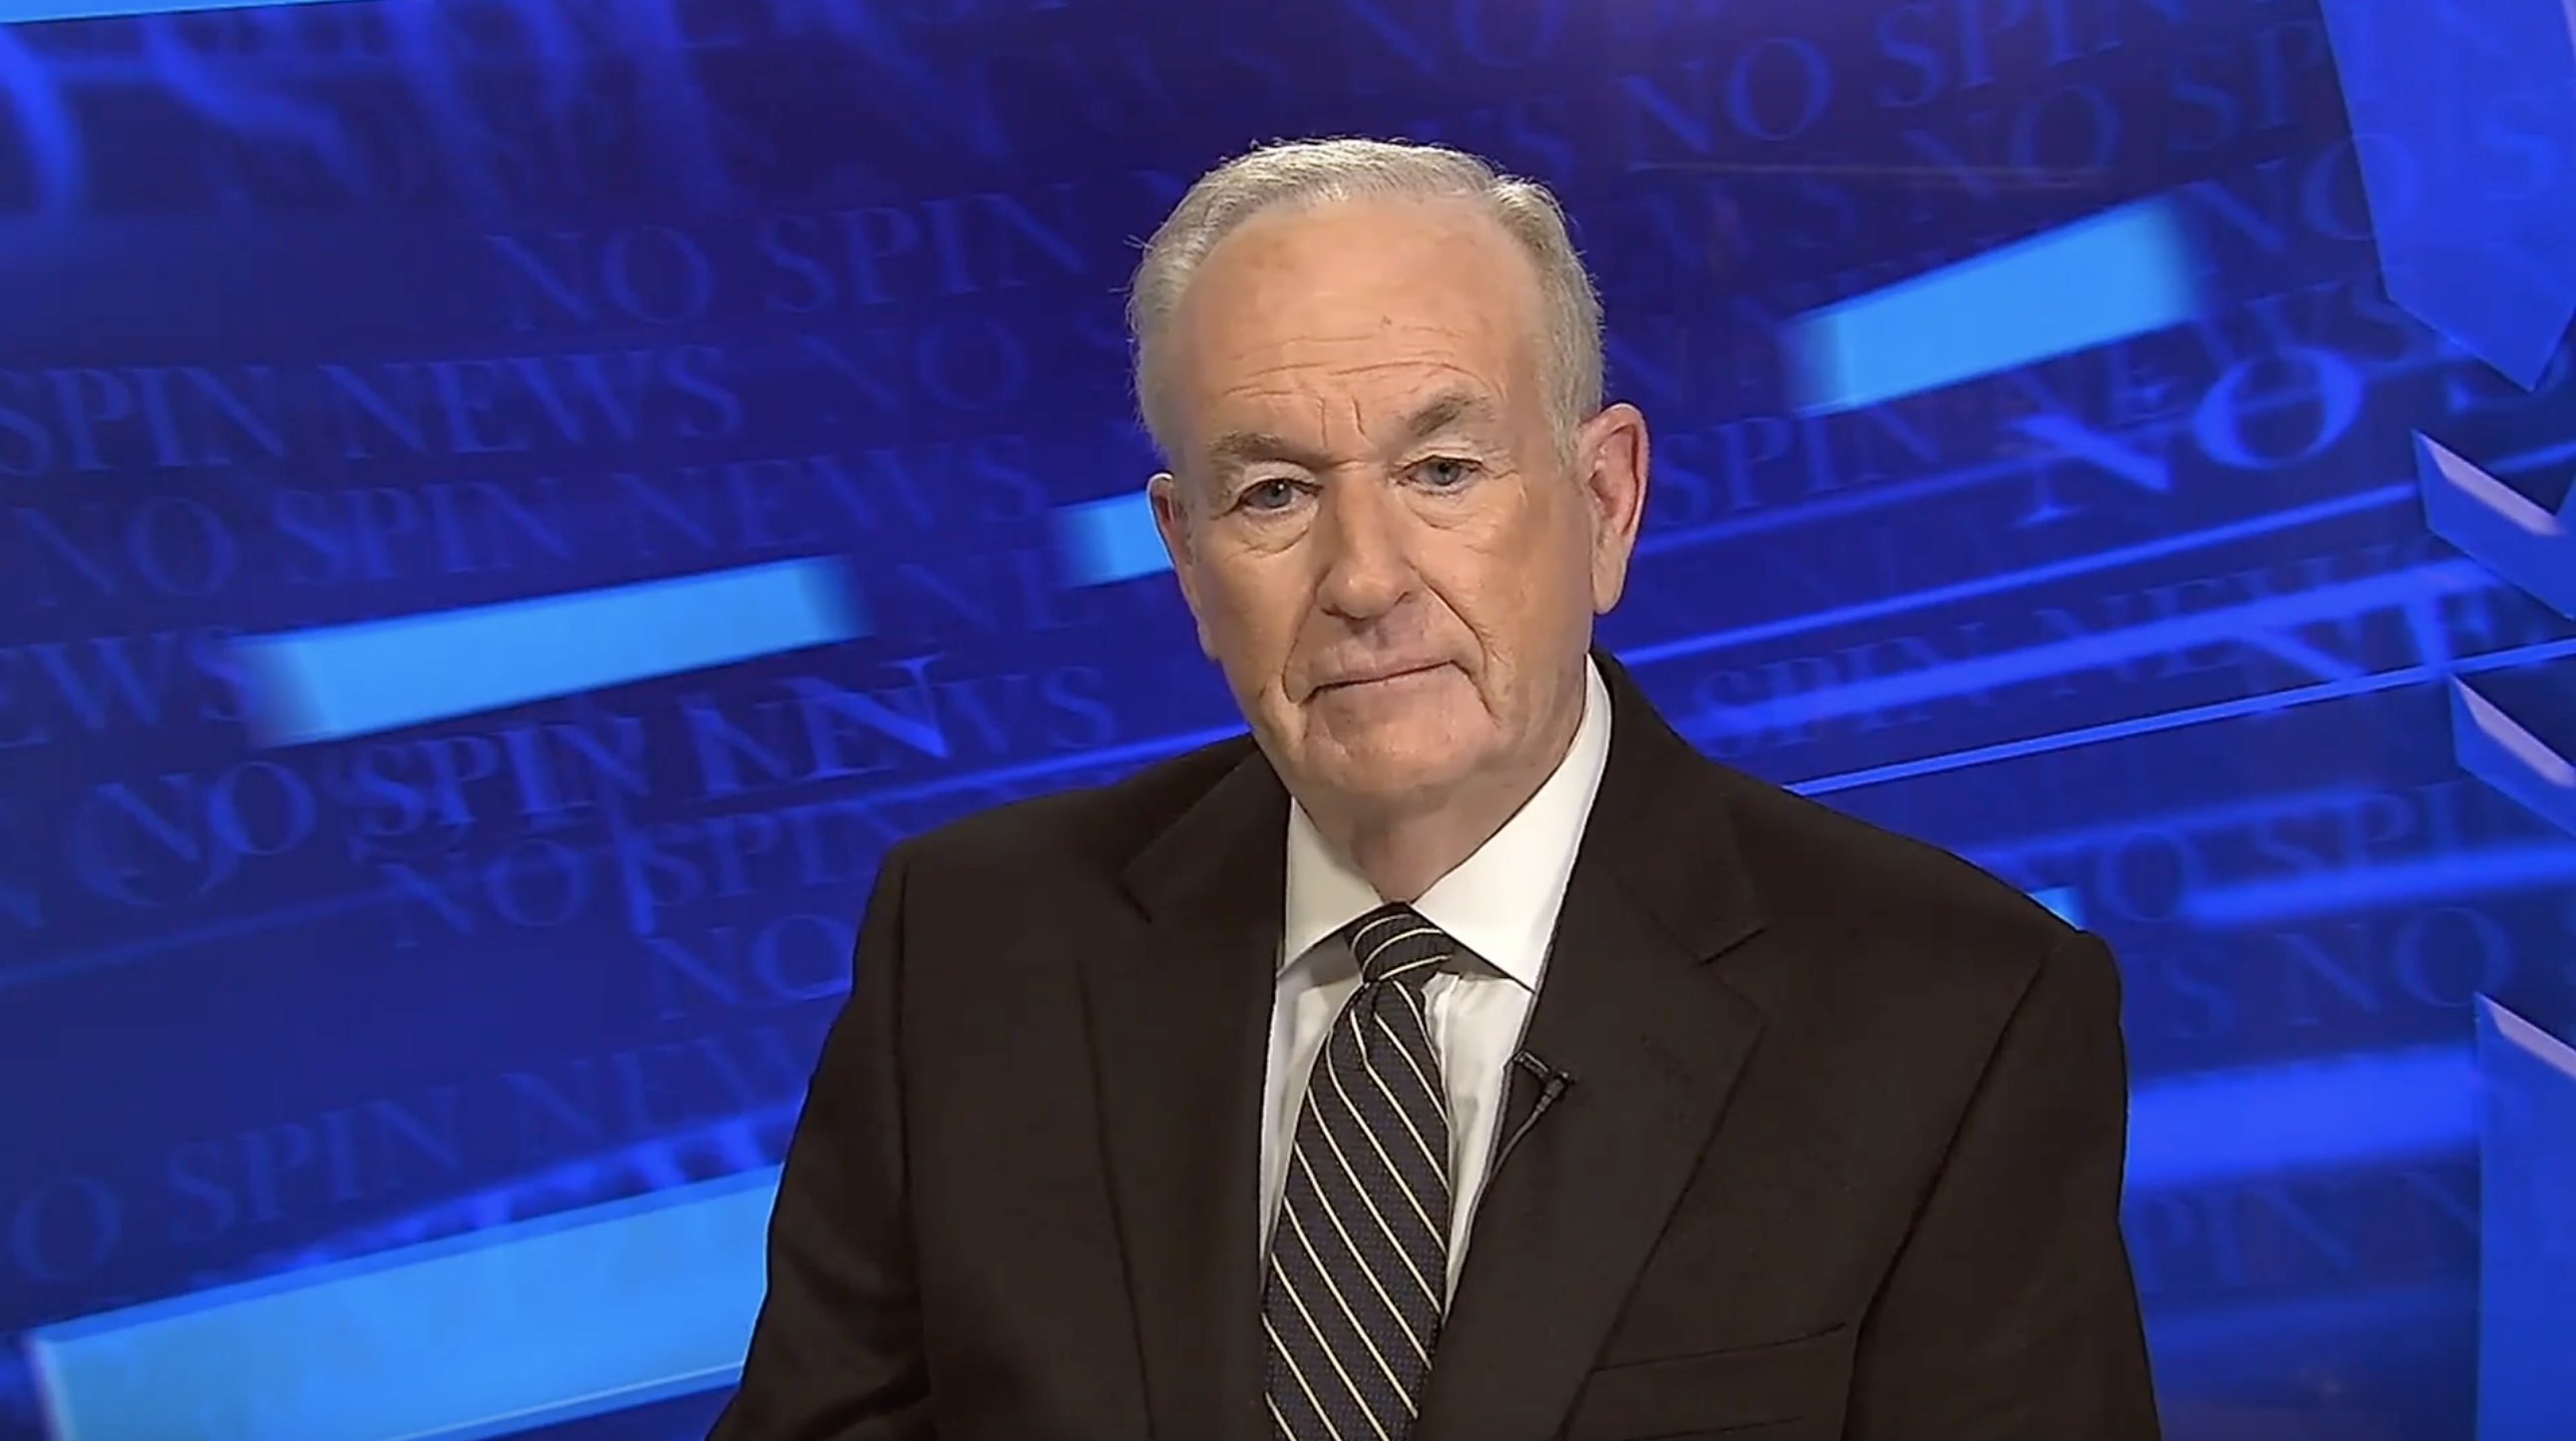 O'Reilly On Biden's Presidency: 'We Made A Terrible Mistake'